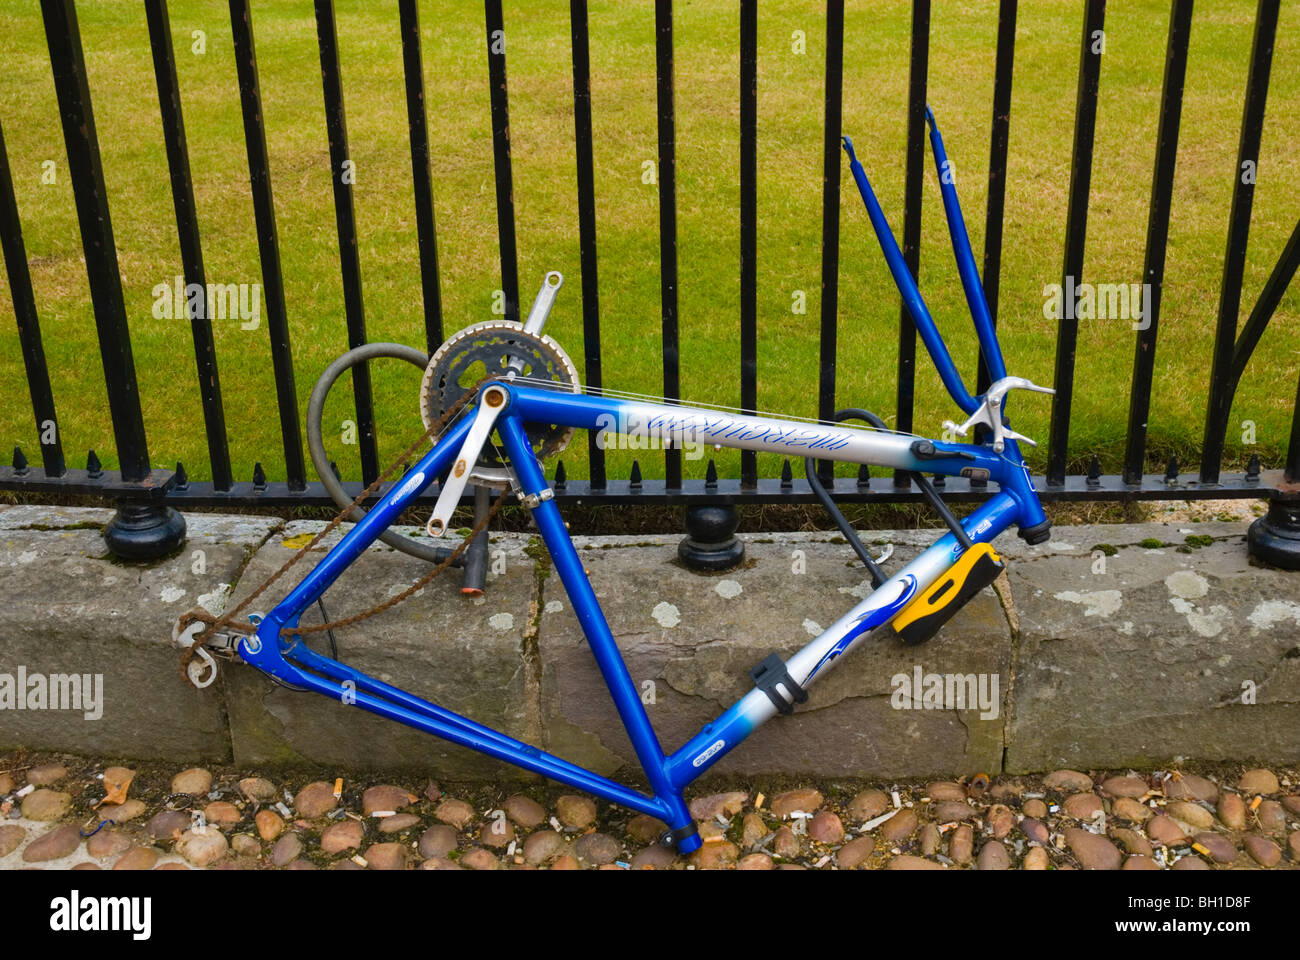 Locked bycycle stripped of wheels and seat Stock Photo